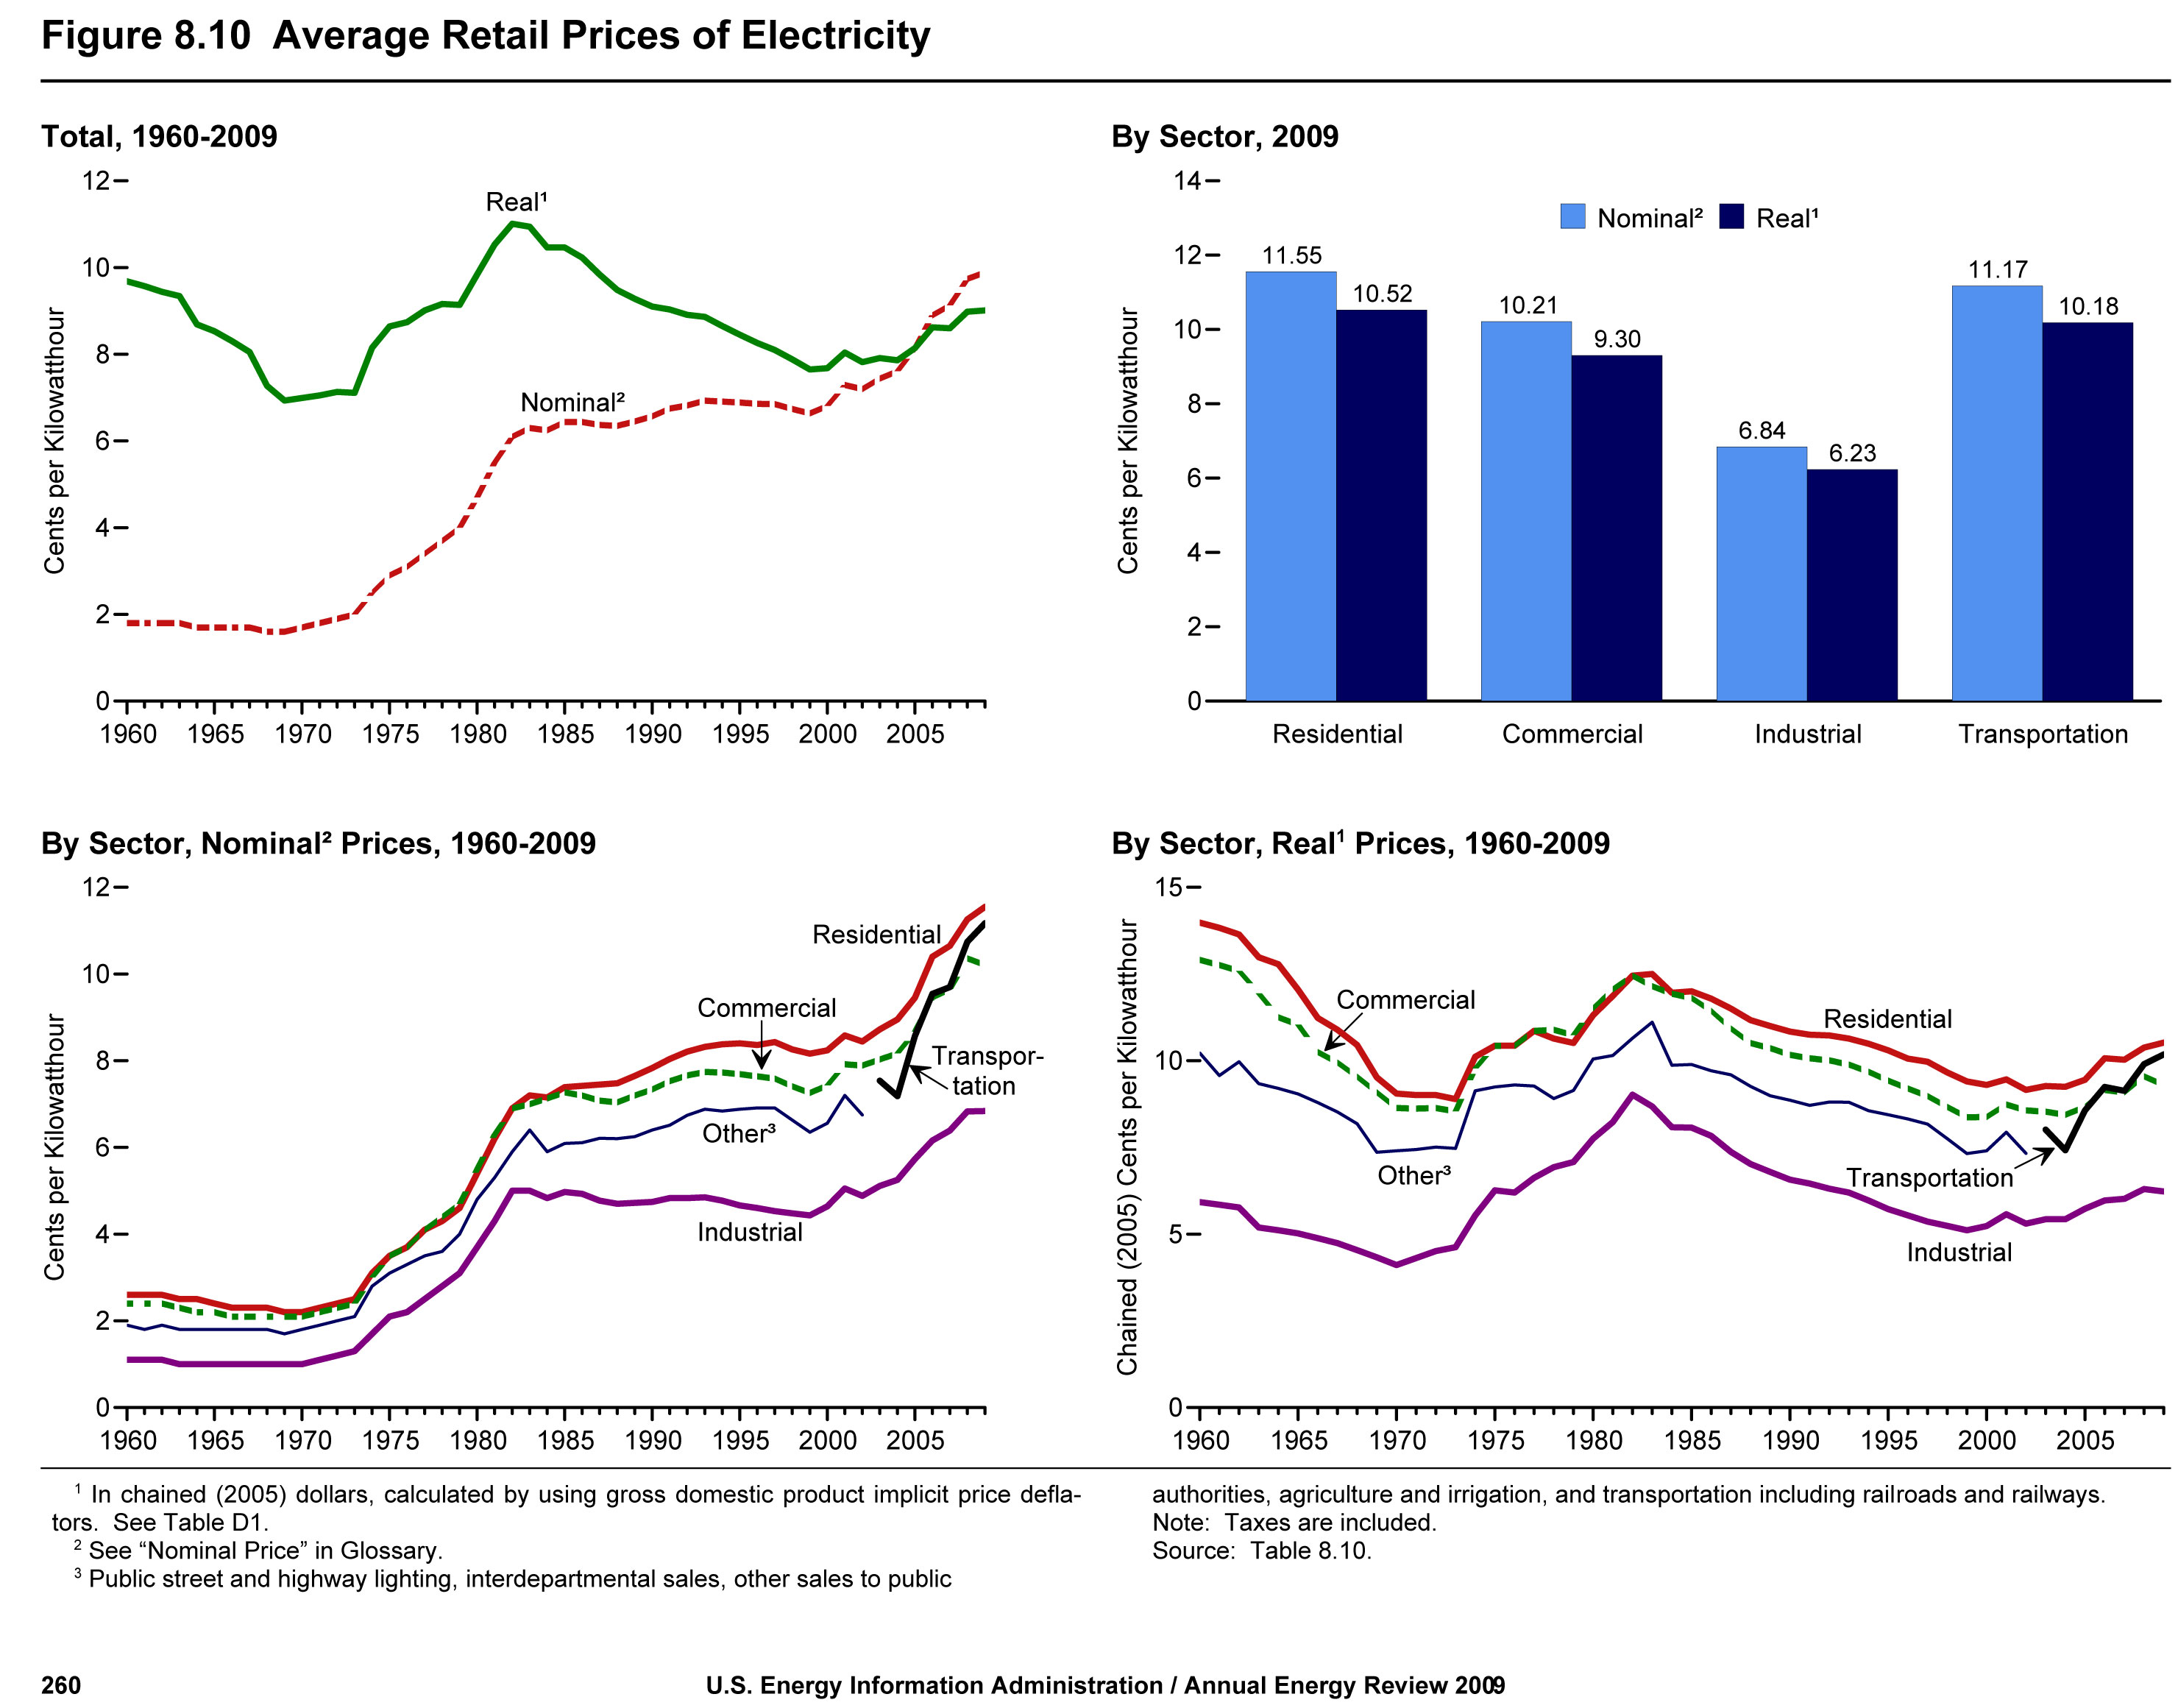 Average retail prices of electricity